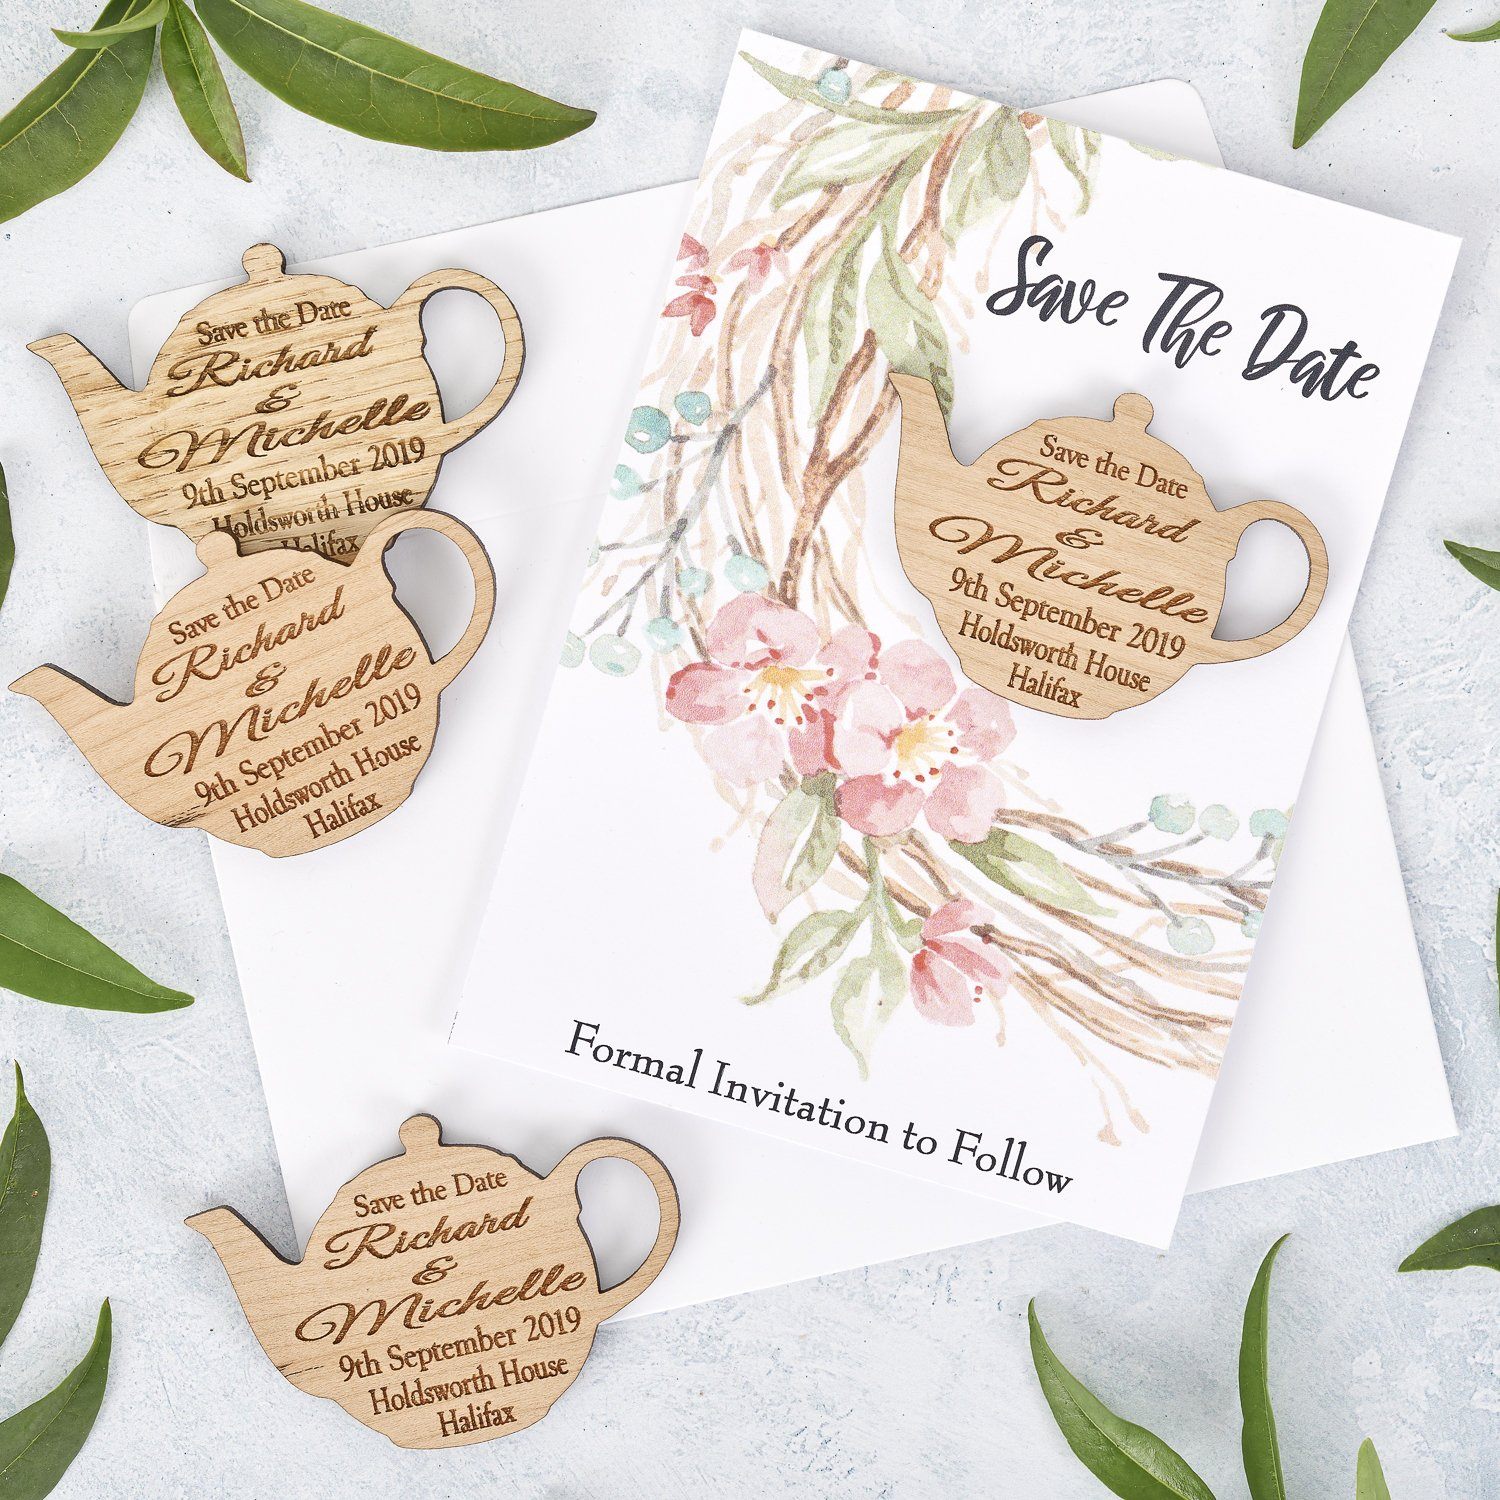 Save The Date Magnet With Cards - Save The Date Magnet Wooden Rustic & Cards - Tea Pot